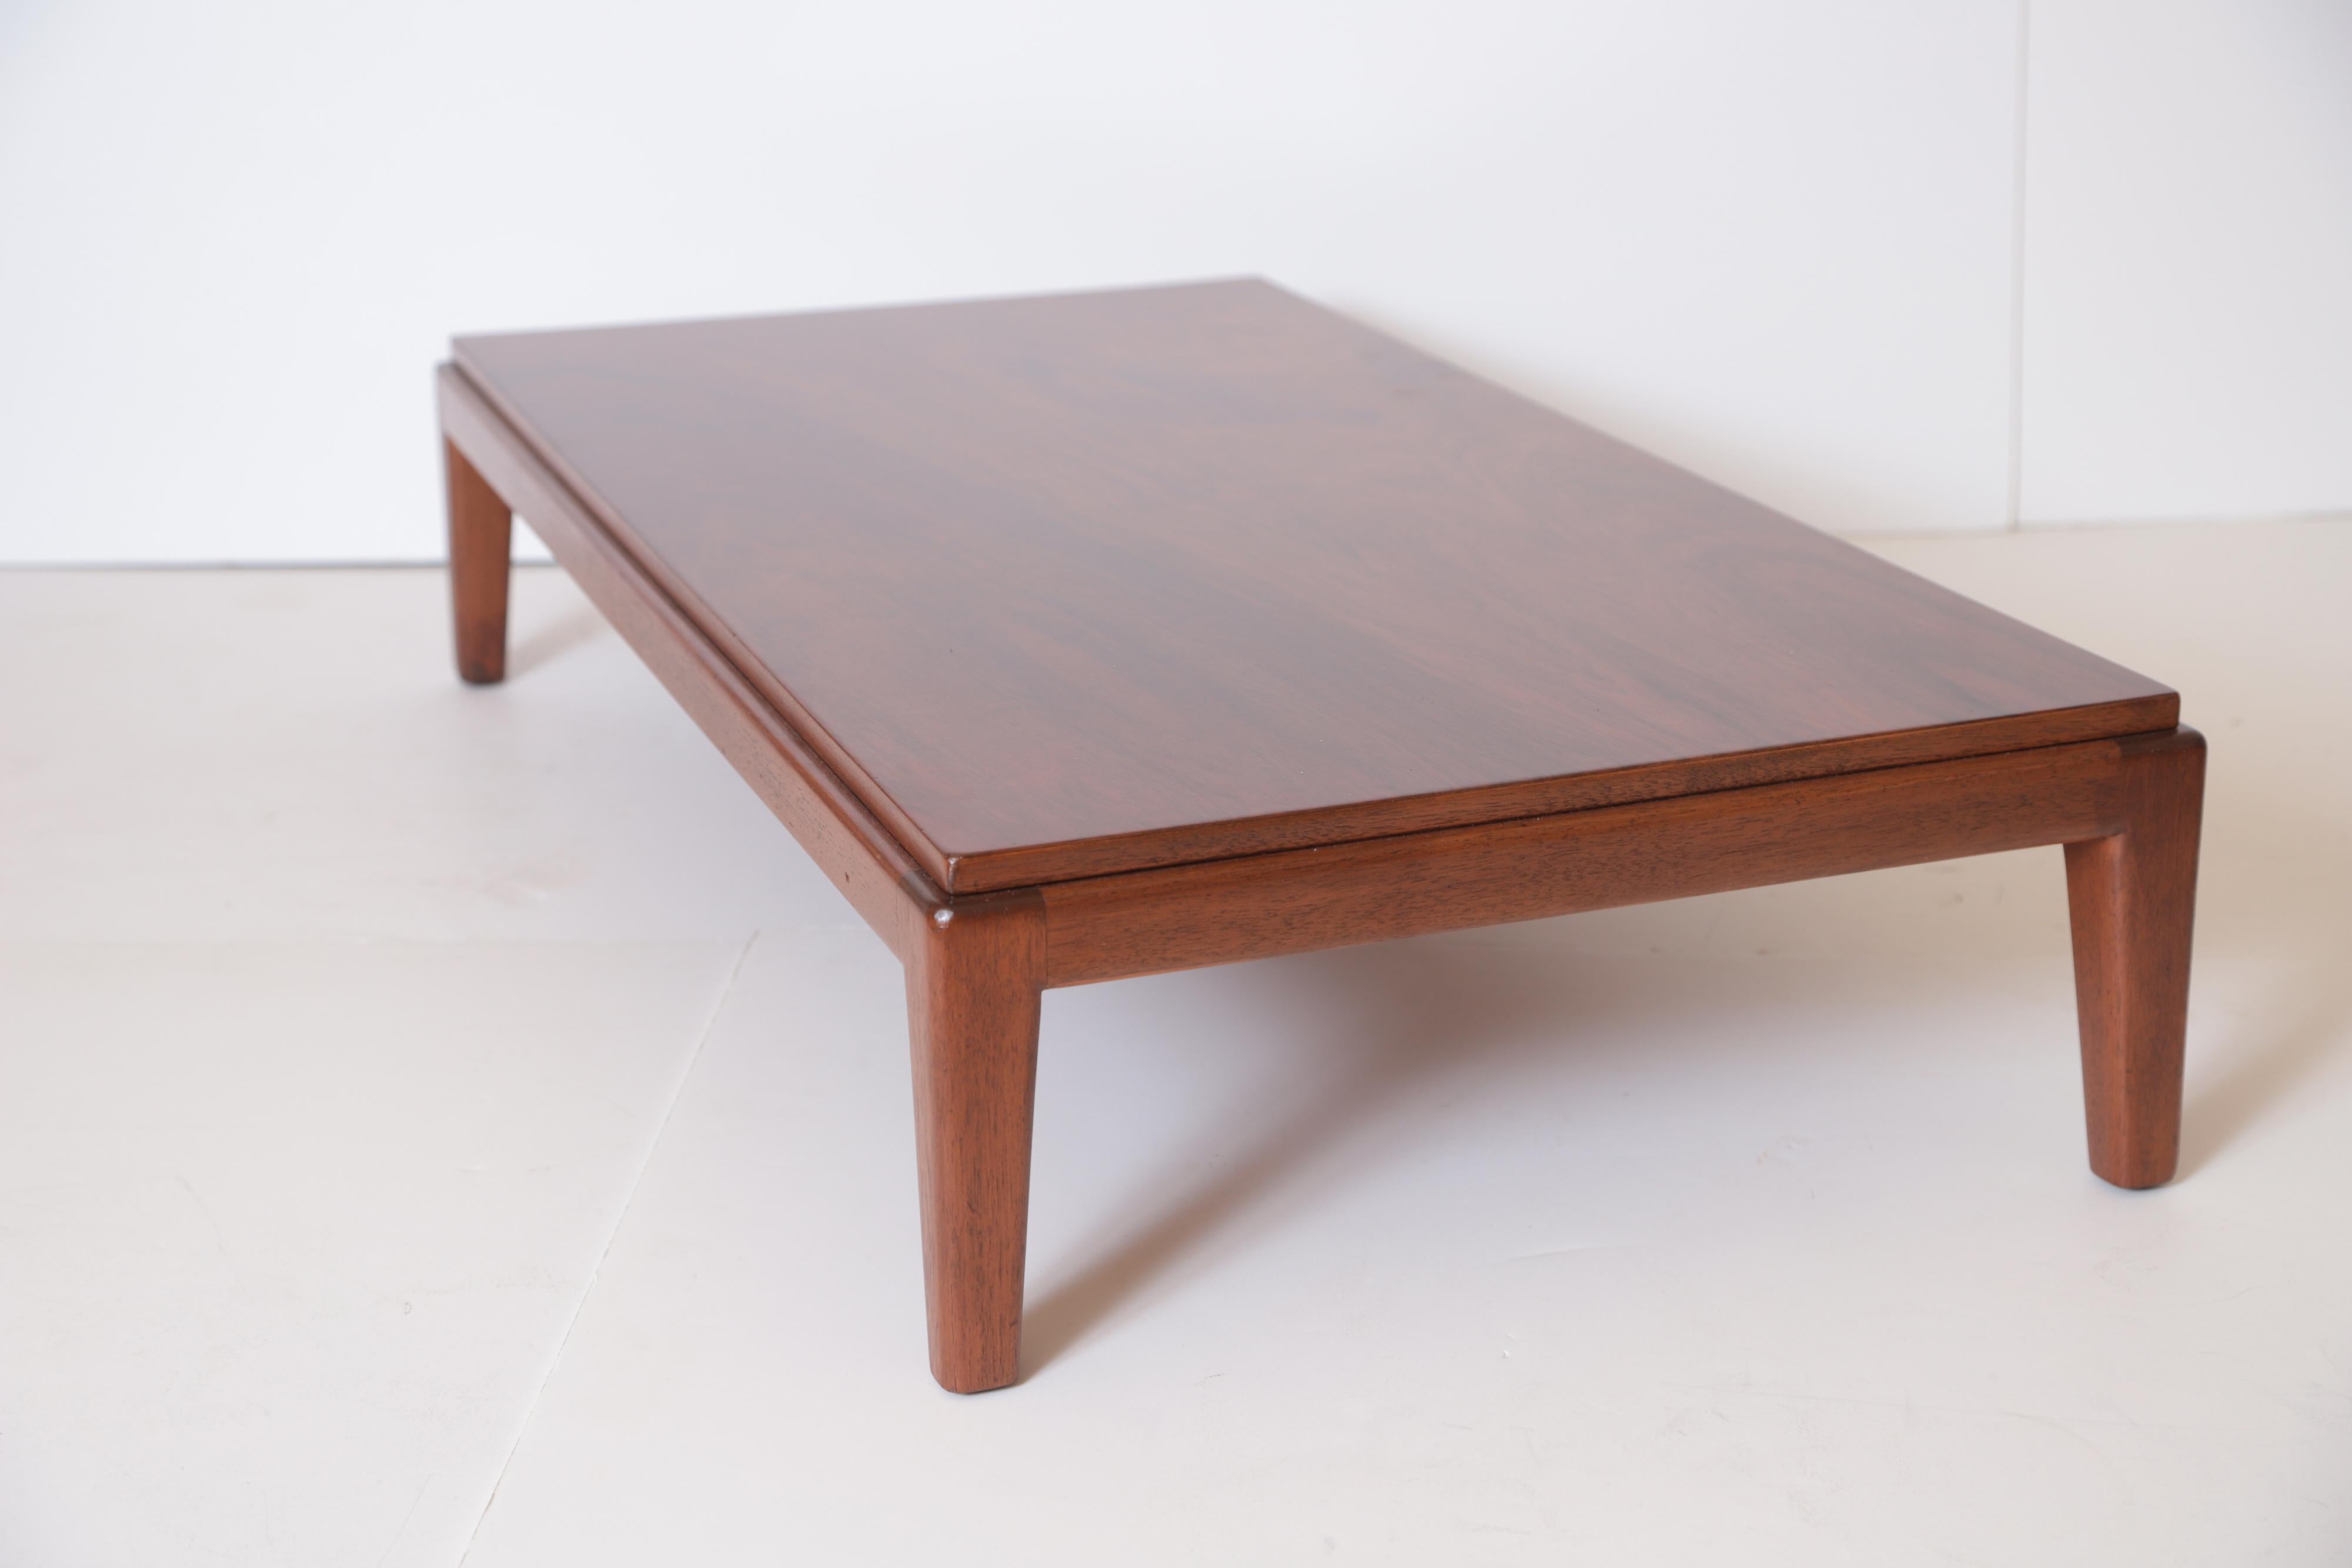 Art Deco Midcentury Low Coffee or Occasional Table by Schmieg & Kotzian For Sale 1